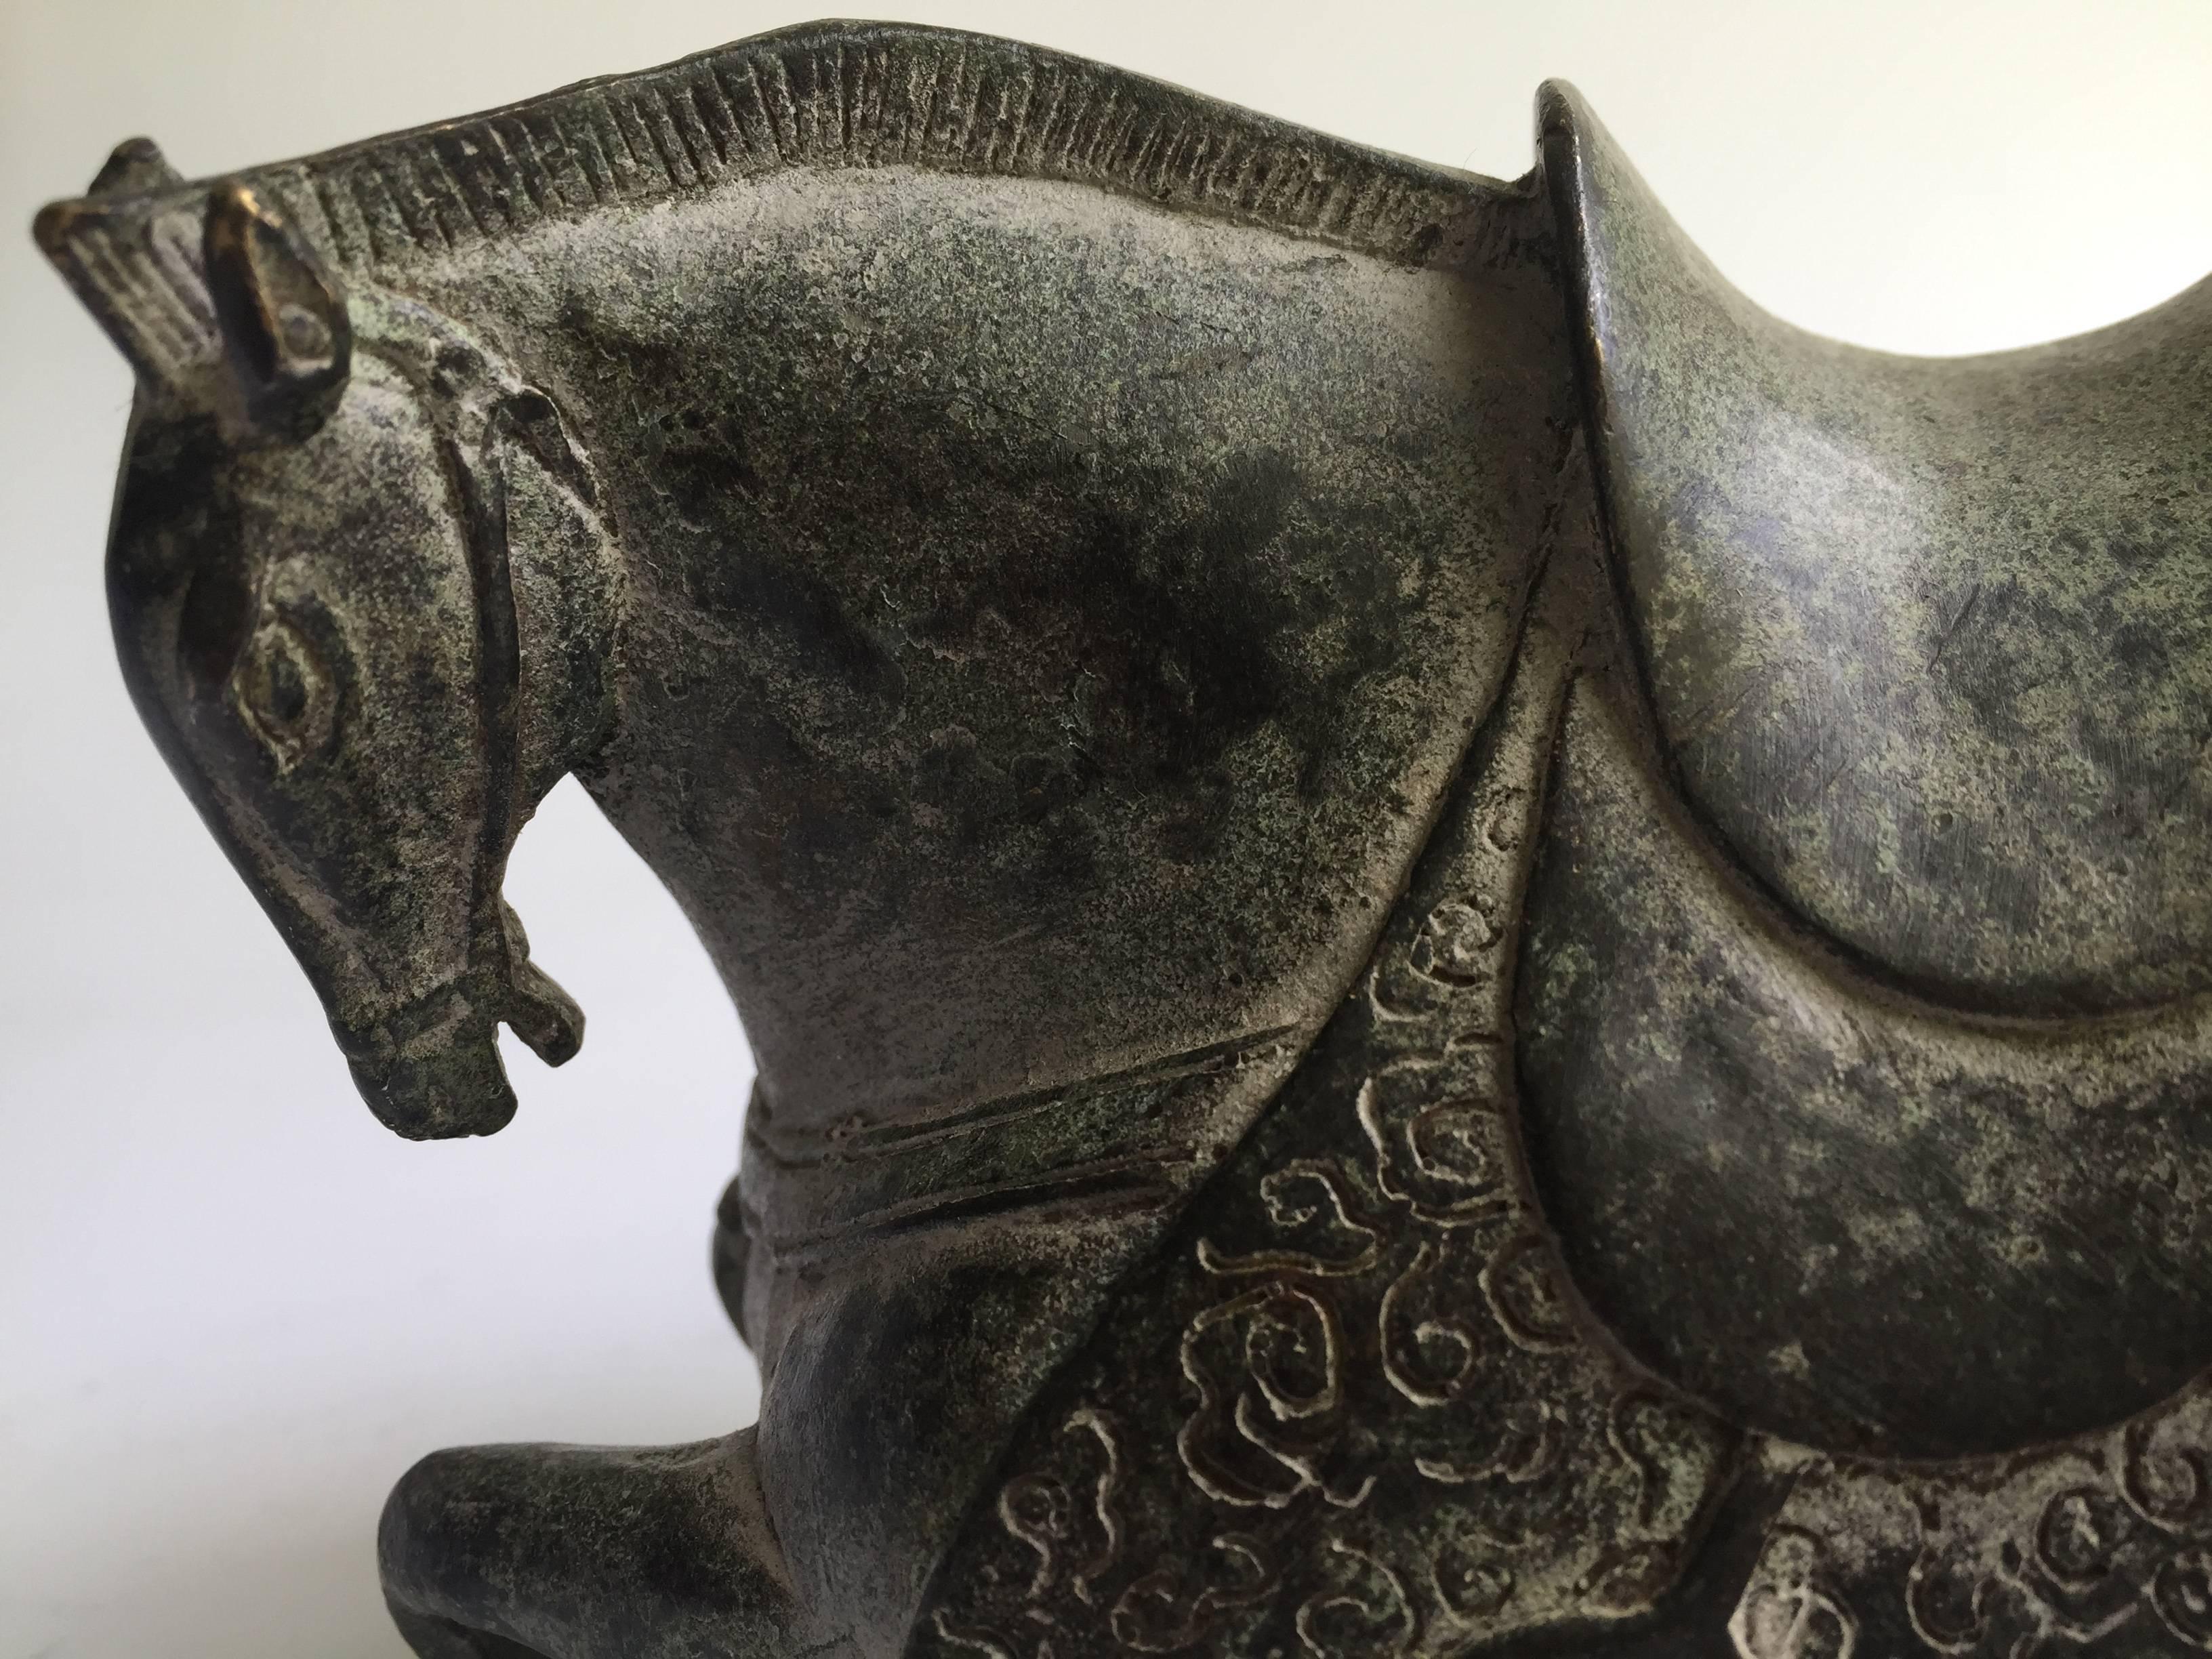 Exquisite 19th century bronze horse in the Han style. The craftsmanship is super with outstanding artistic expression. The scale of the horse's body parts follows an ancient model that has an almost modern feel to it. The muscles are well defined